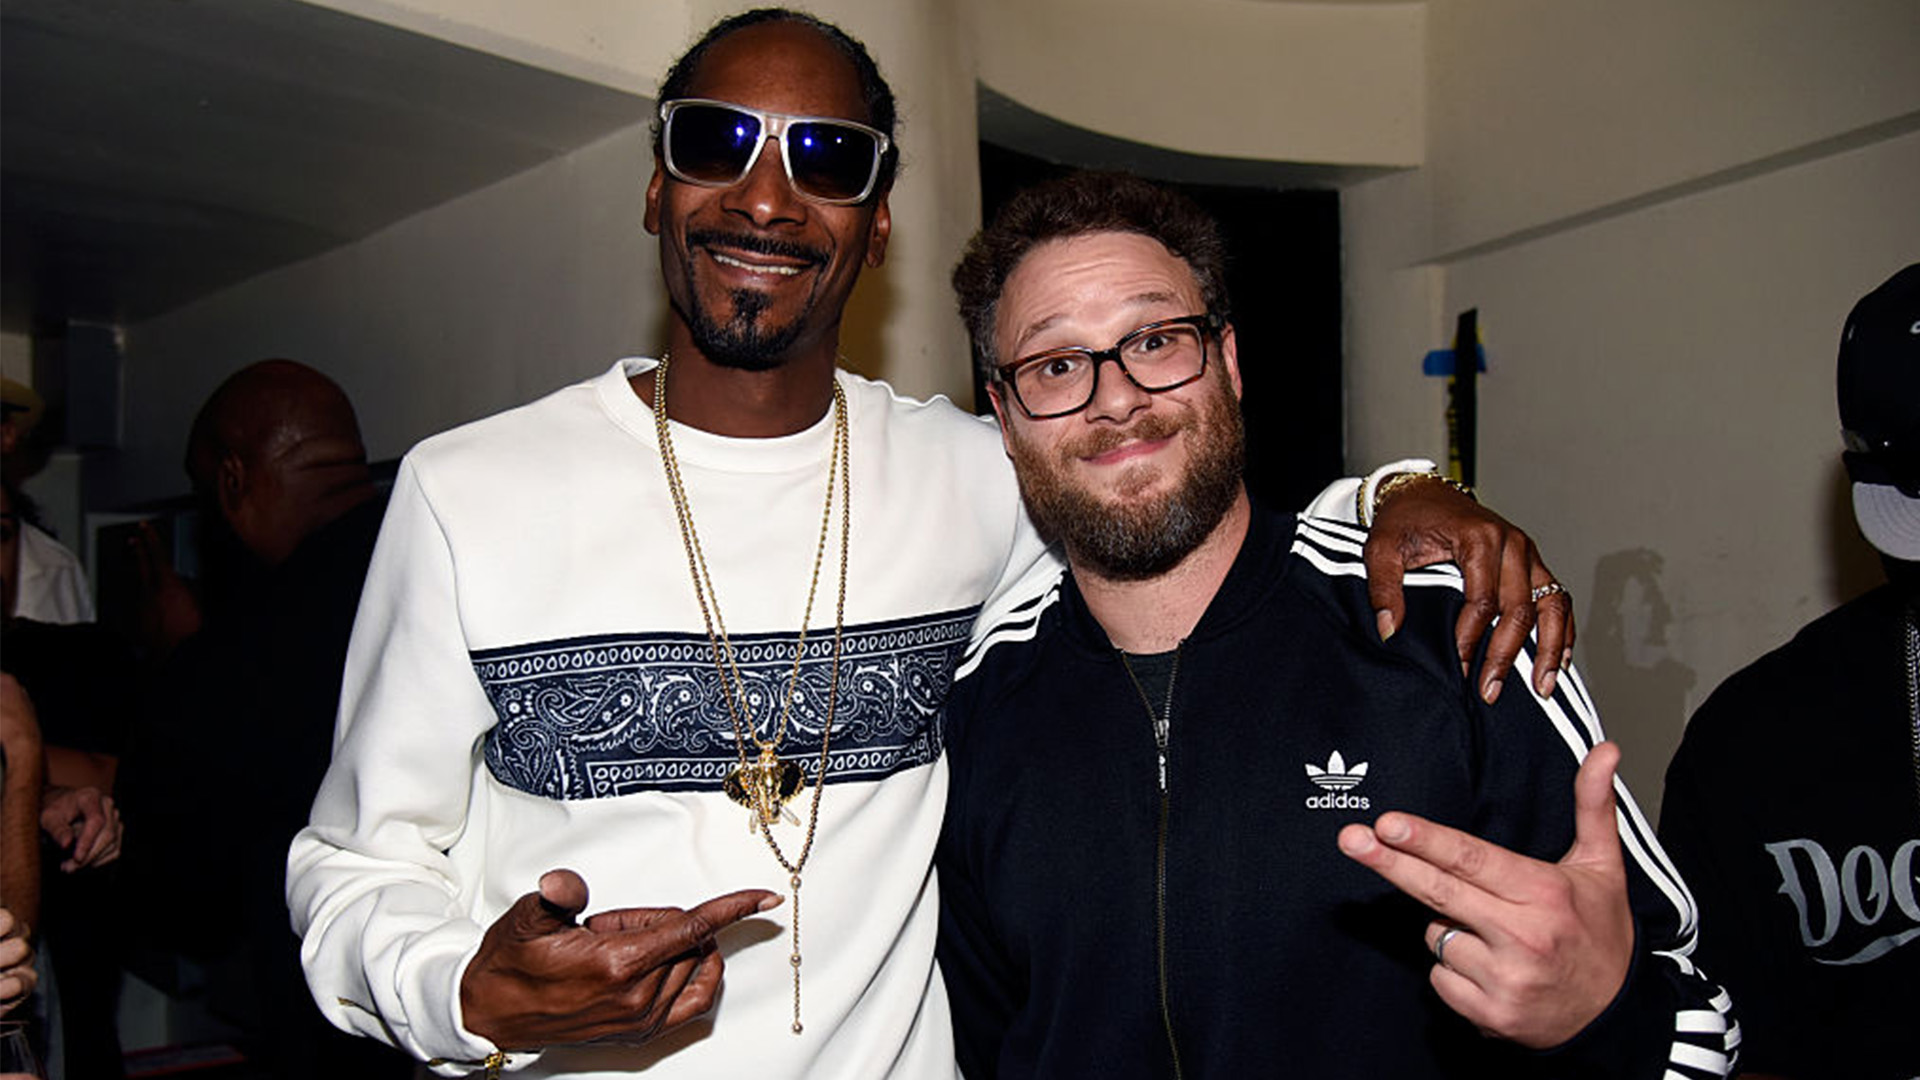 Snoop Dogg Once Auctioned Off A Blunt For $10K, According To Seth Rogen